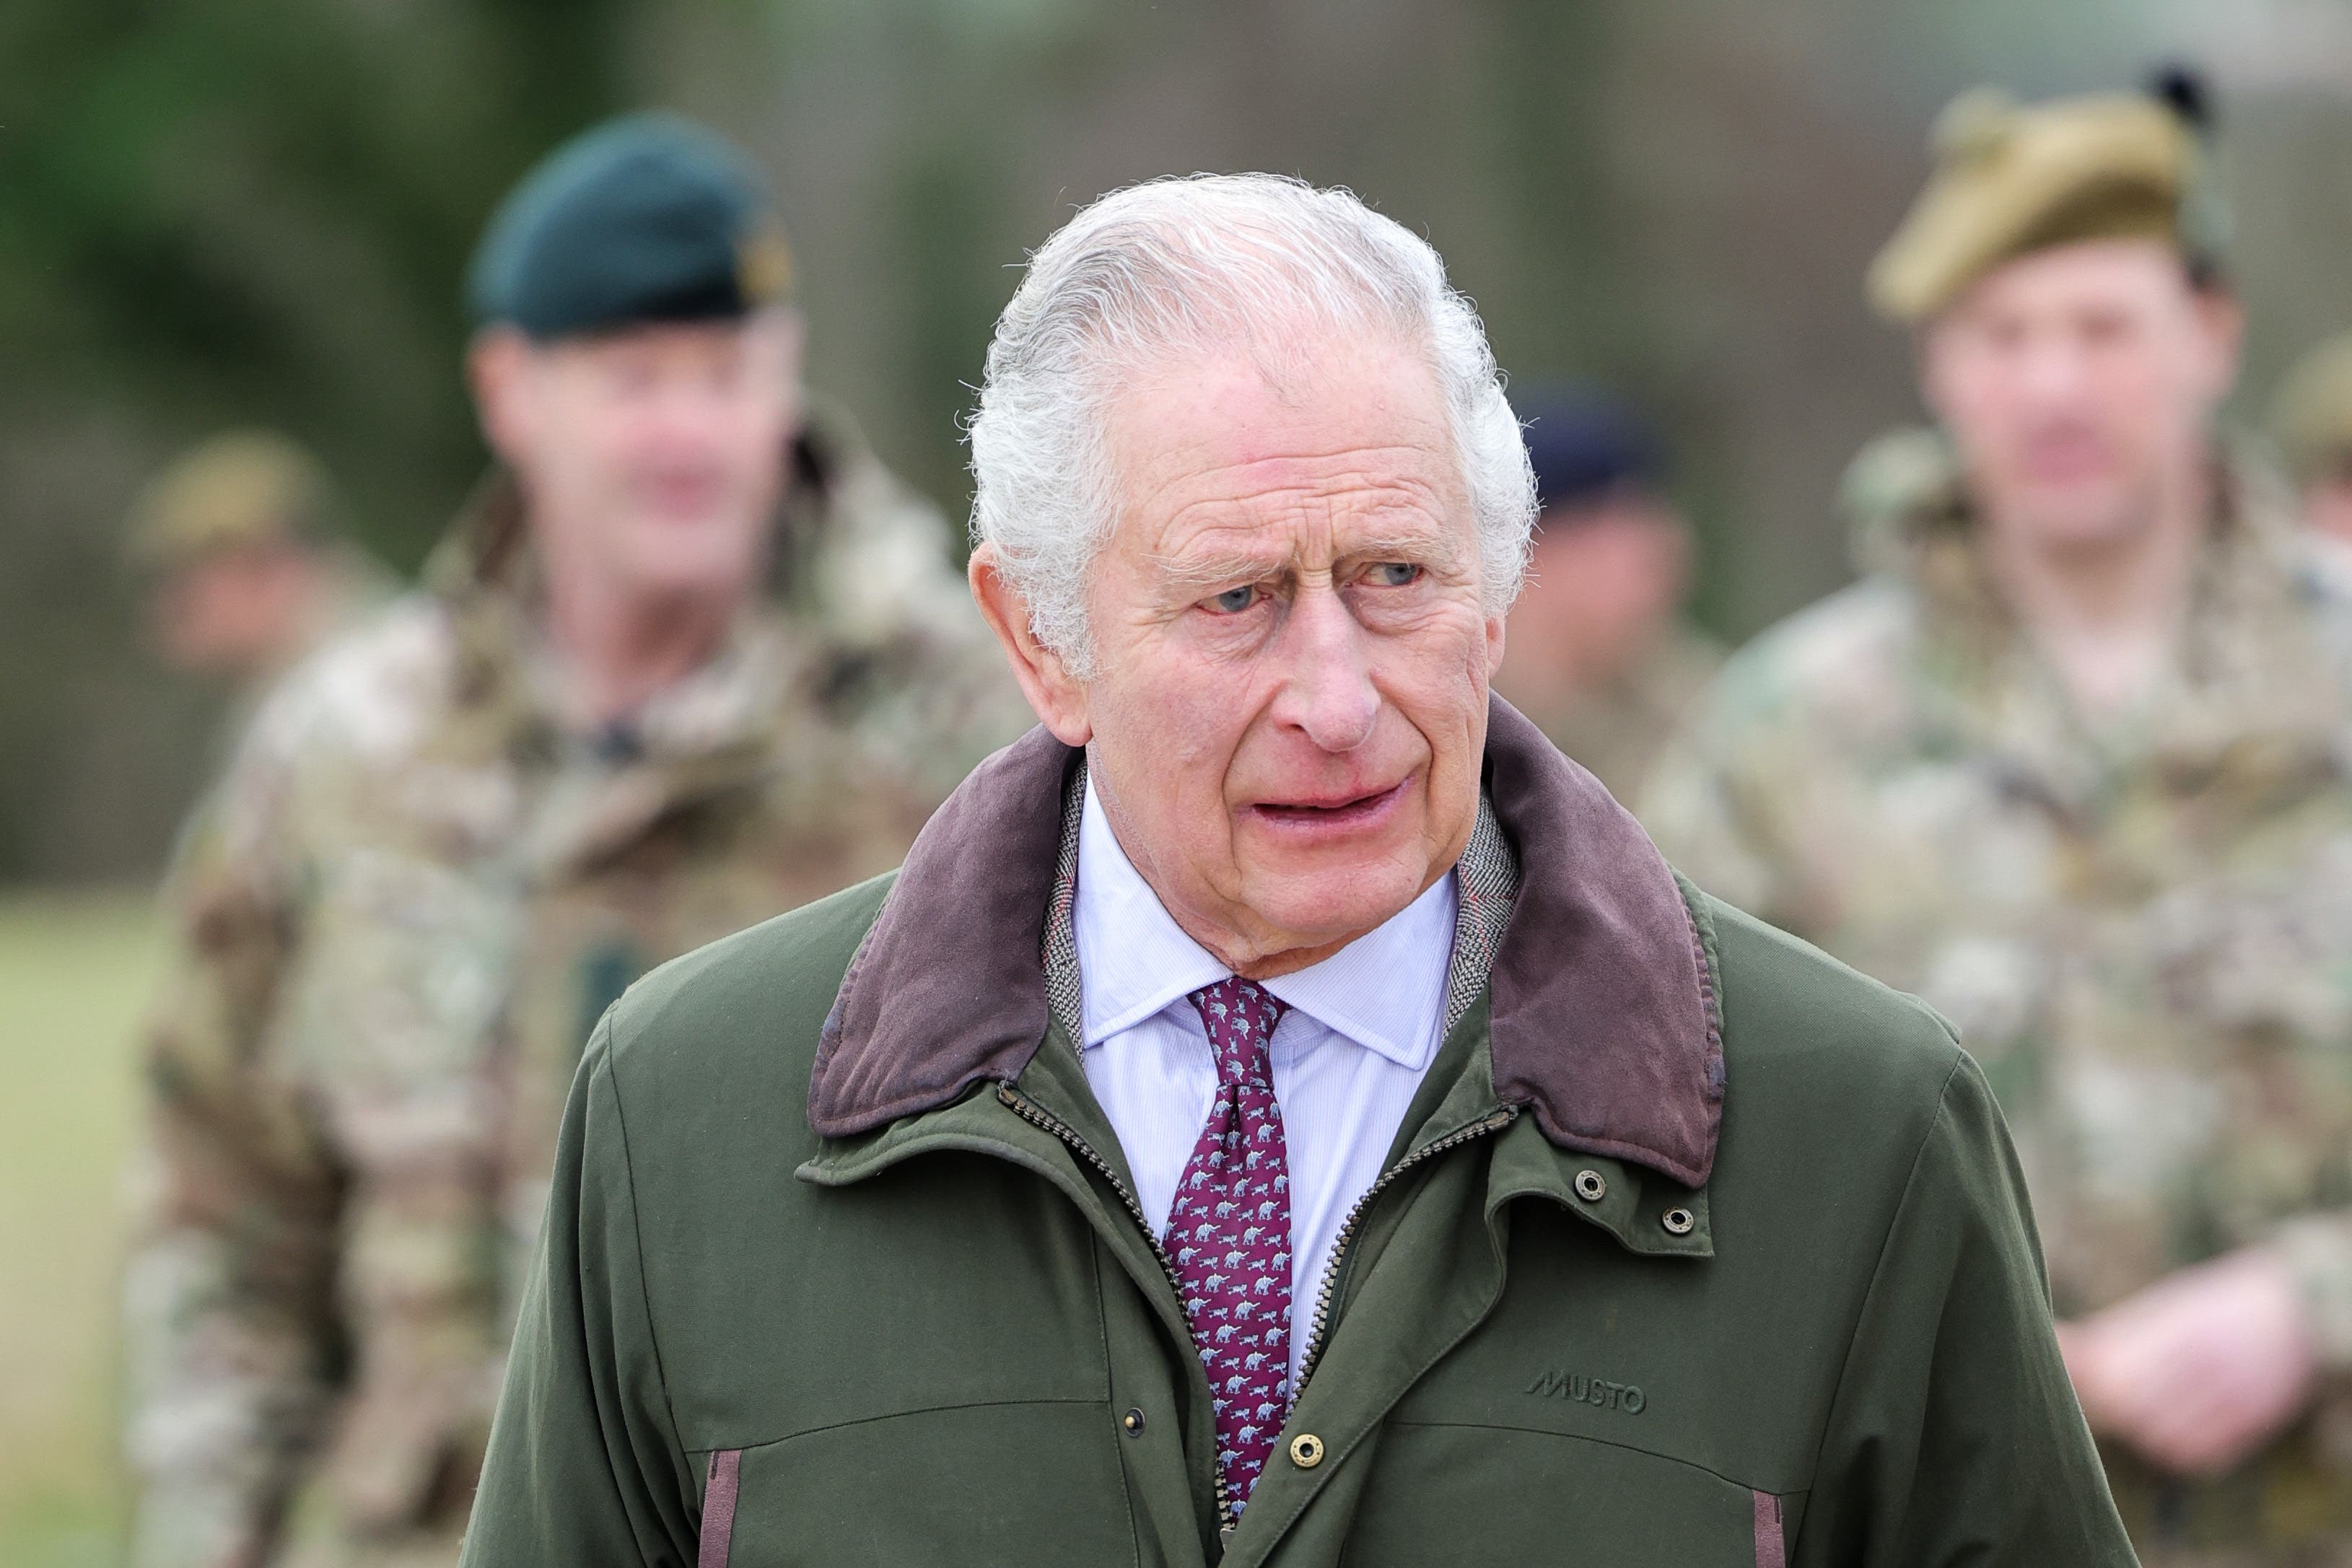 The King during a visit to a training site for Ukrainian military recruits, in Wiltshire (Chris Jackson/PA)